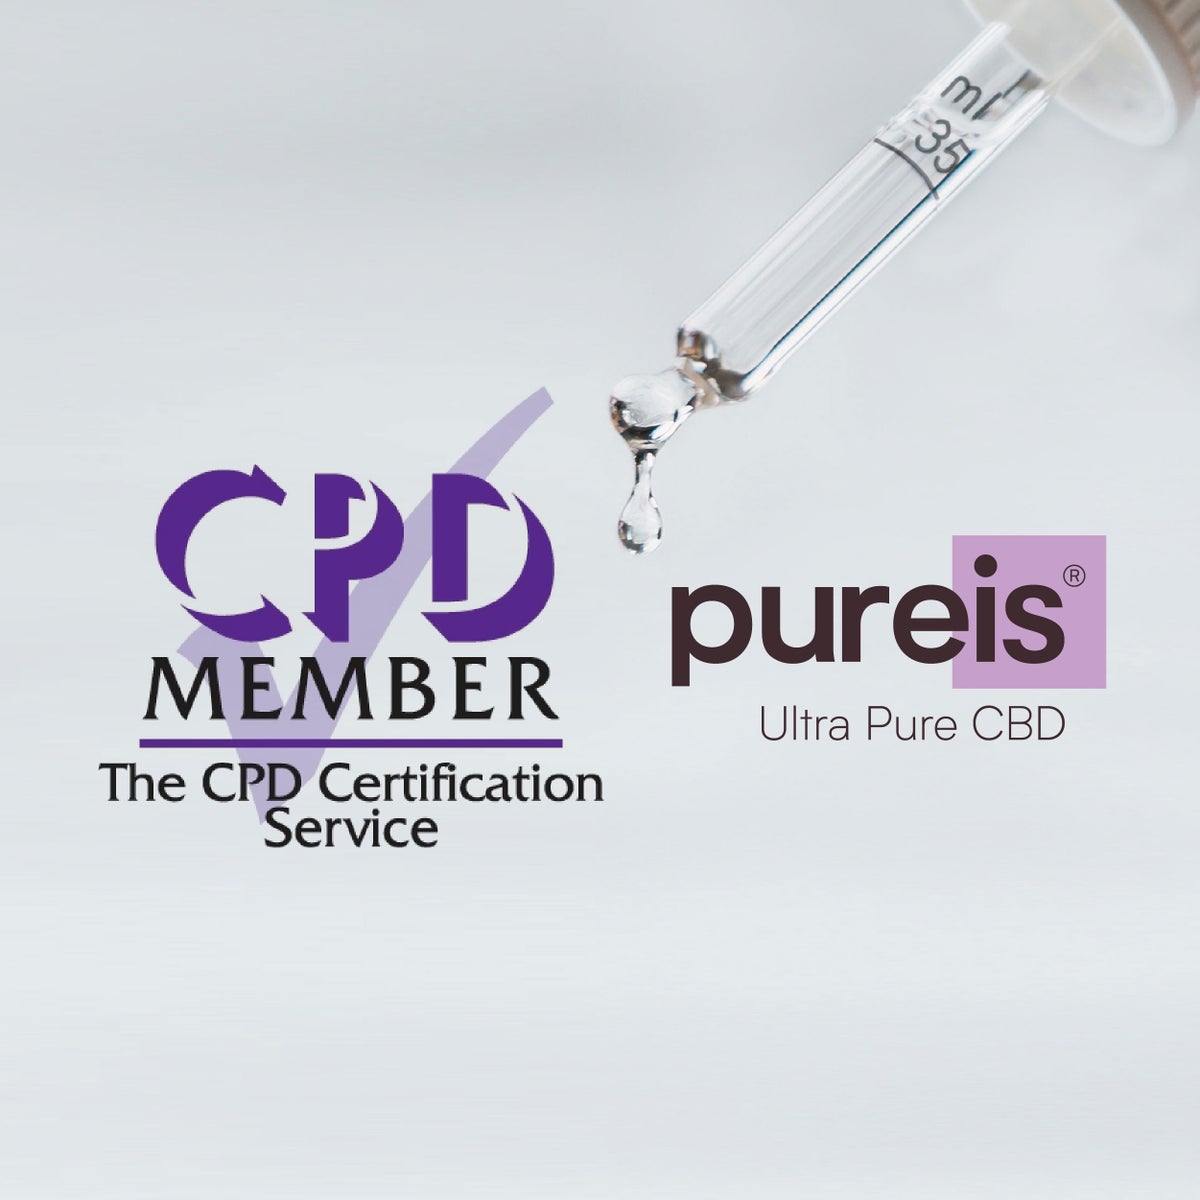 Healthcare Portal, Course Summary: Here we provide engaging and succinct training for healthcare professionals on all you need to know about CBD and Pureis® Ultra Pure CBD.  Once you have reviewed the relevant training below and successfully completed the questionnaire, you will receive a signed CBD certification from the much revered Professor Mike Barnes, along with a free Pureis® Ultra Pure CBD sample.